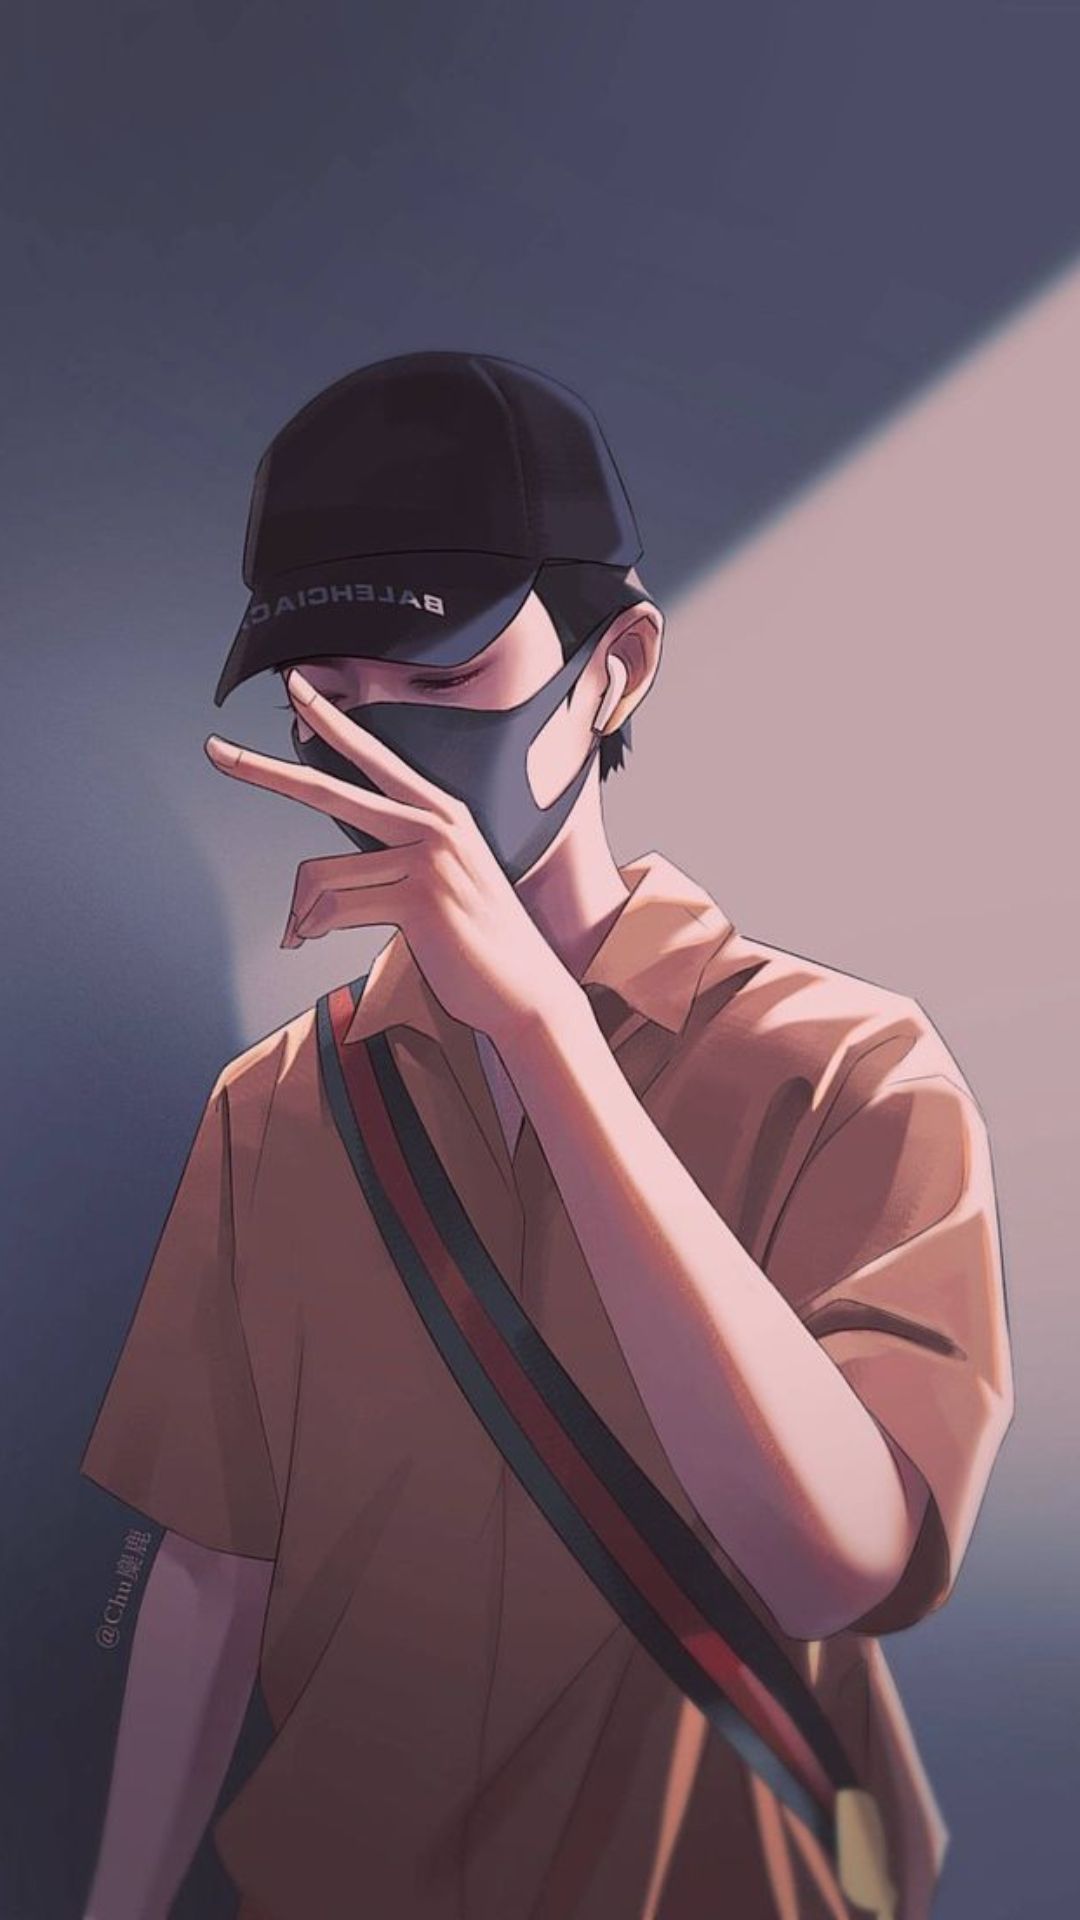 Boy With Cap Wallpaper Pictures